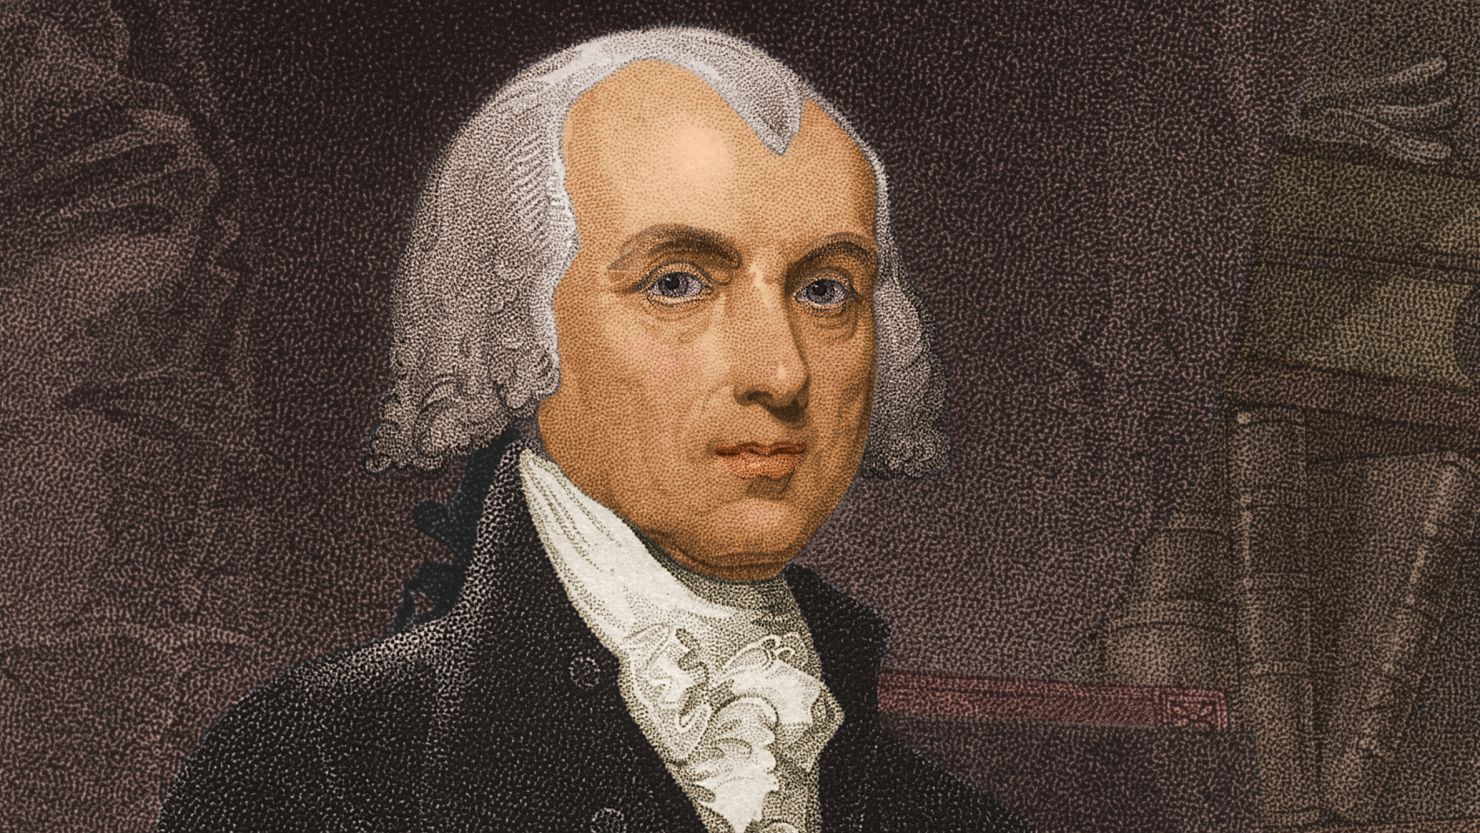 James Madison and other Founding Fathers recognized that parties would combat each other and slow down government.